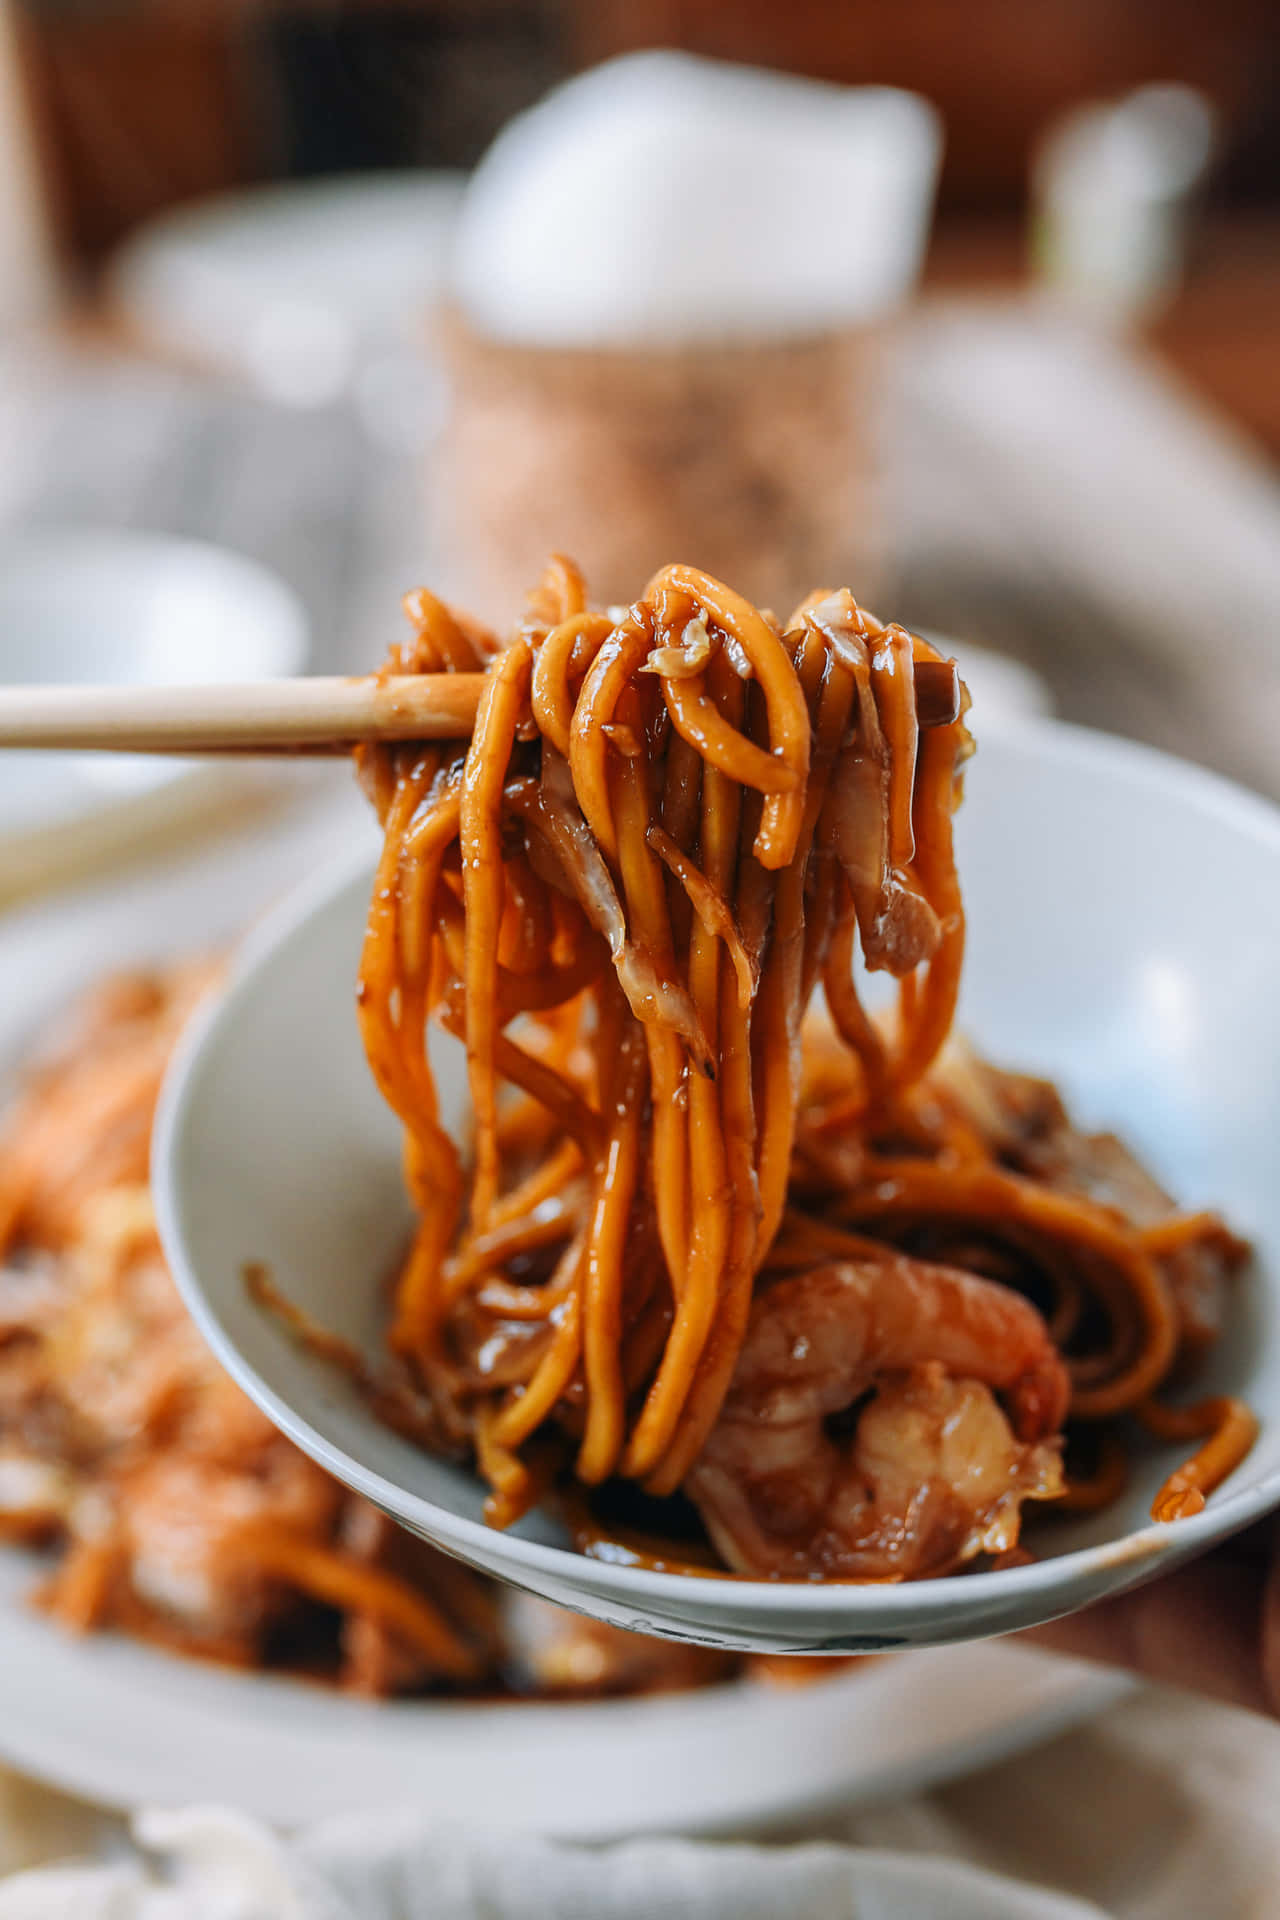 Hokkien Mee Placed On Small Bowl Picture